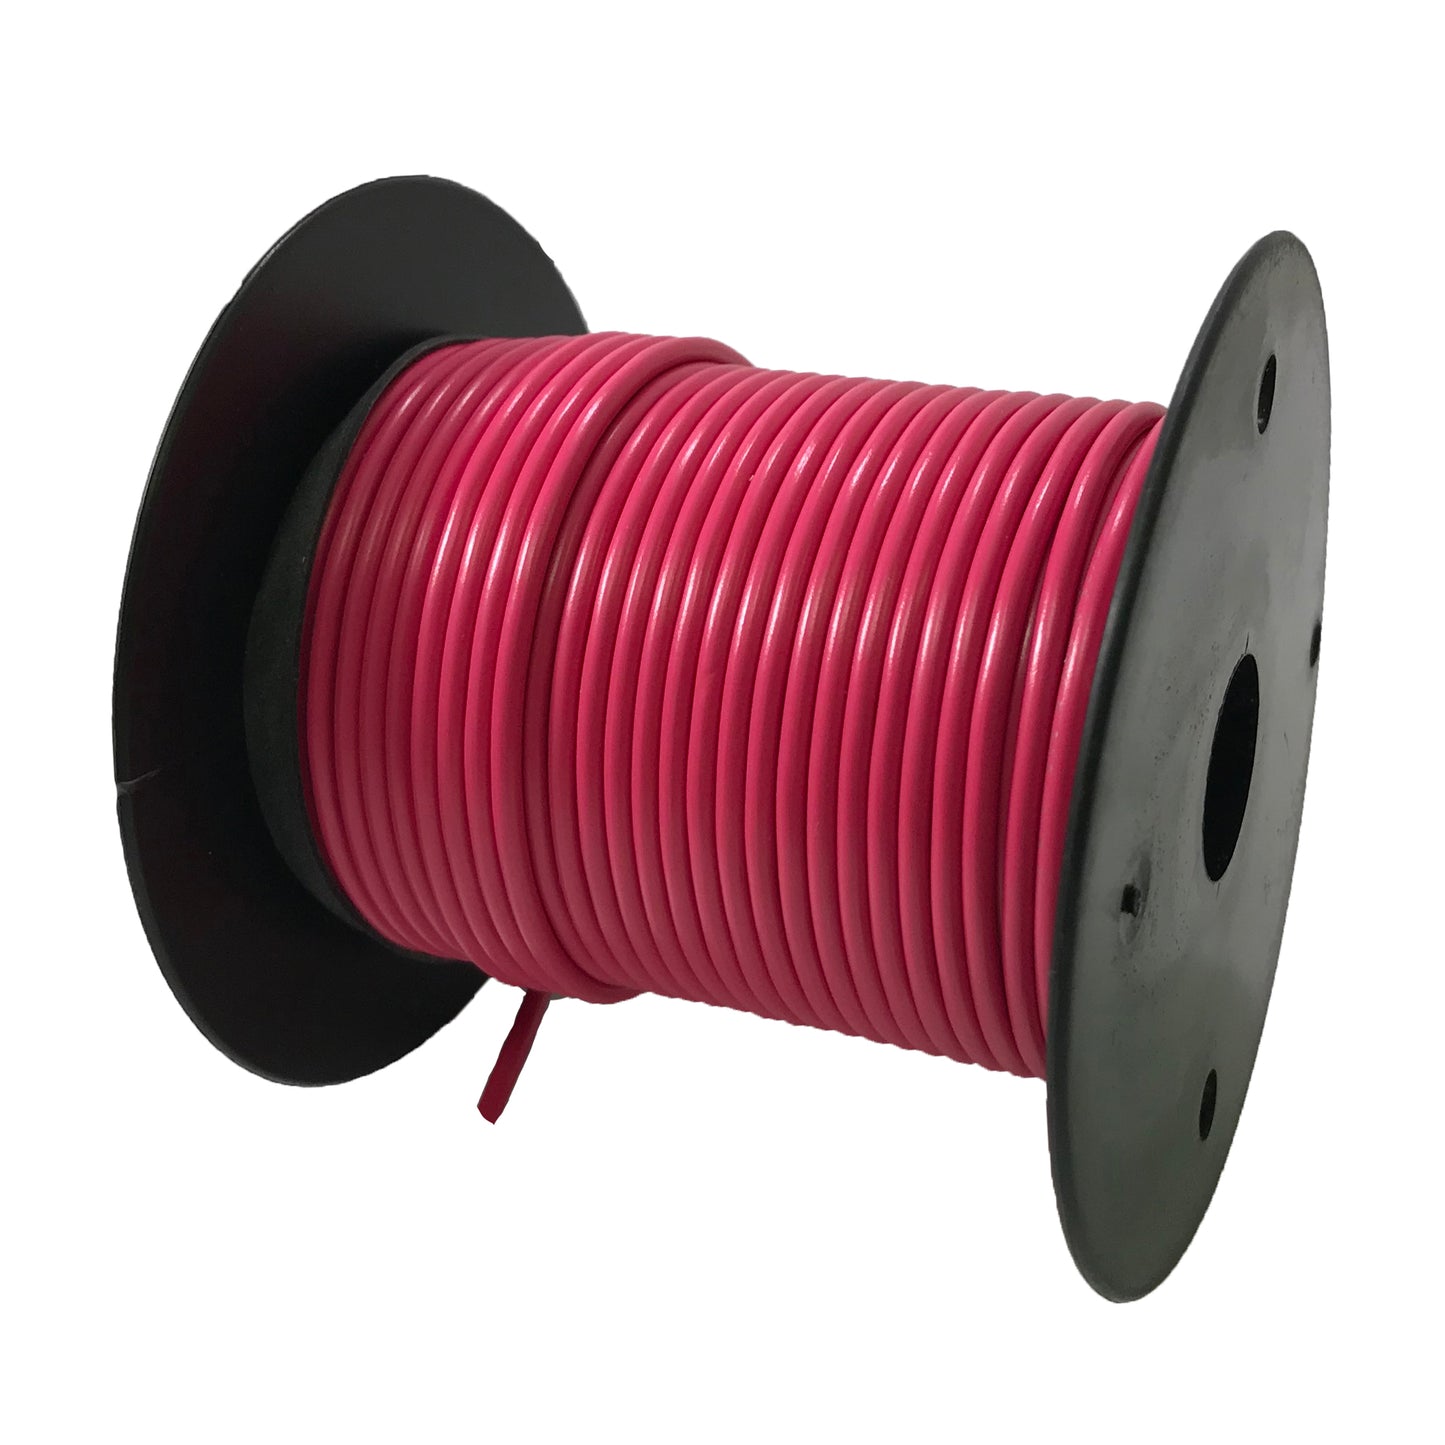 18 Gauge Pink Primary Wire - 25 FT